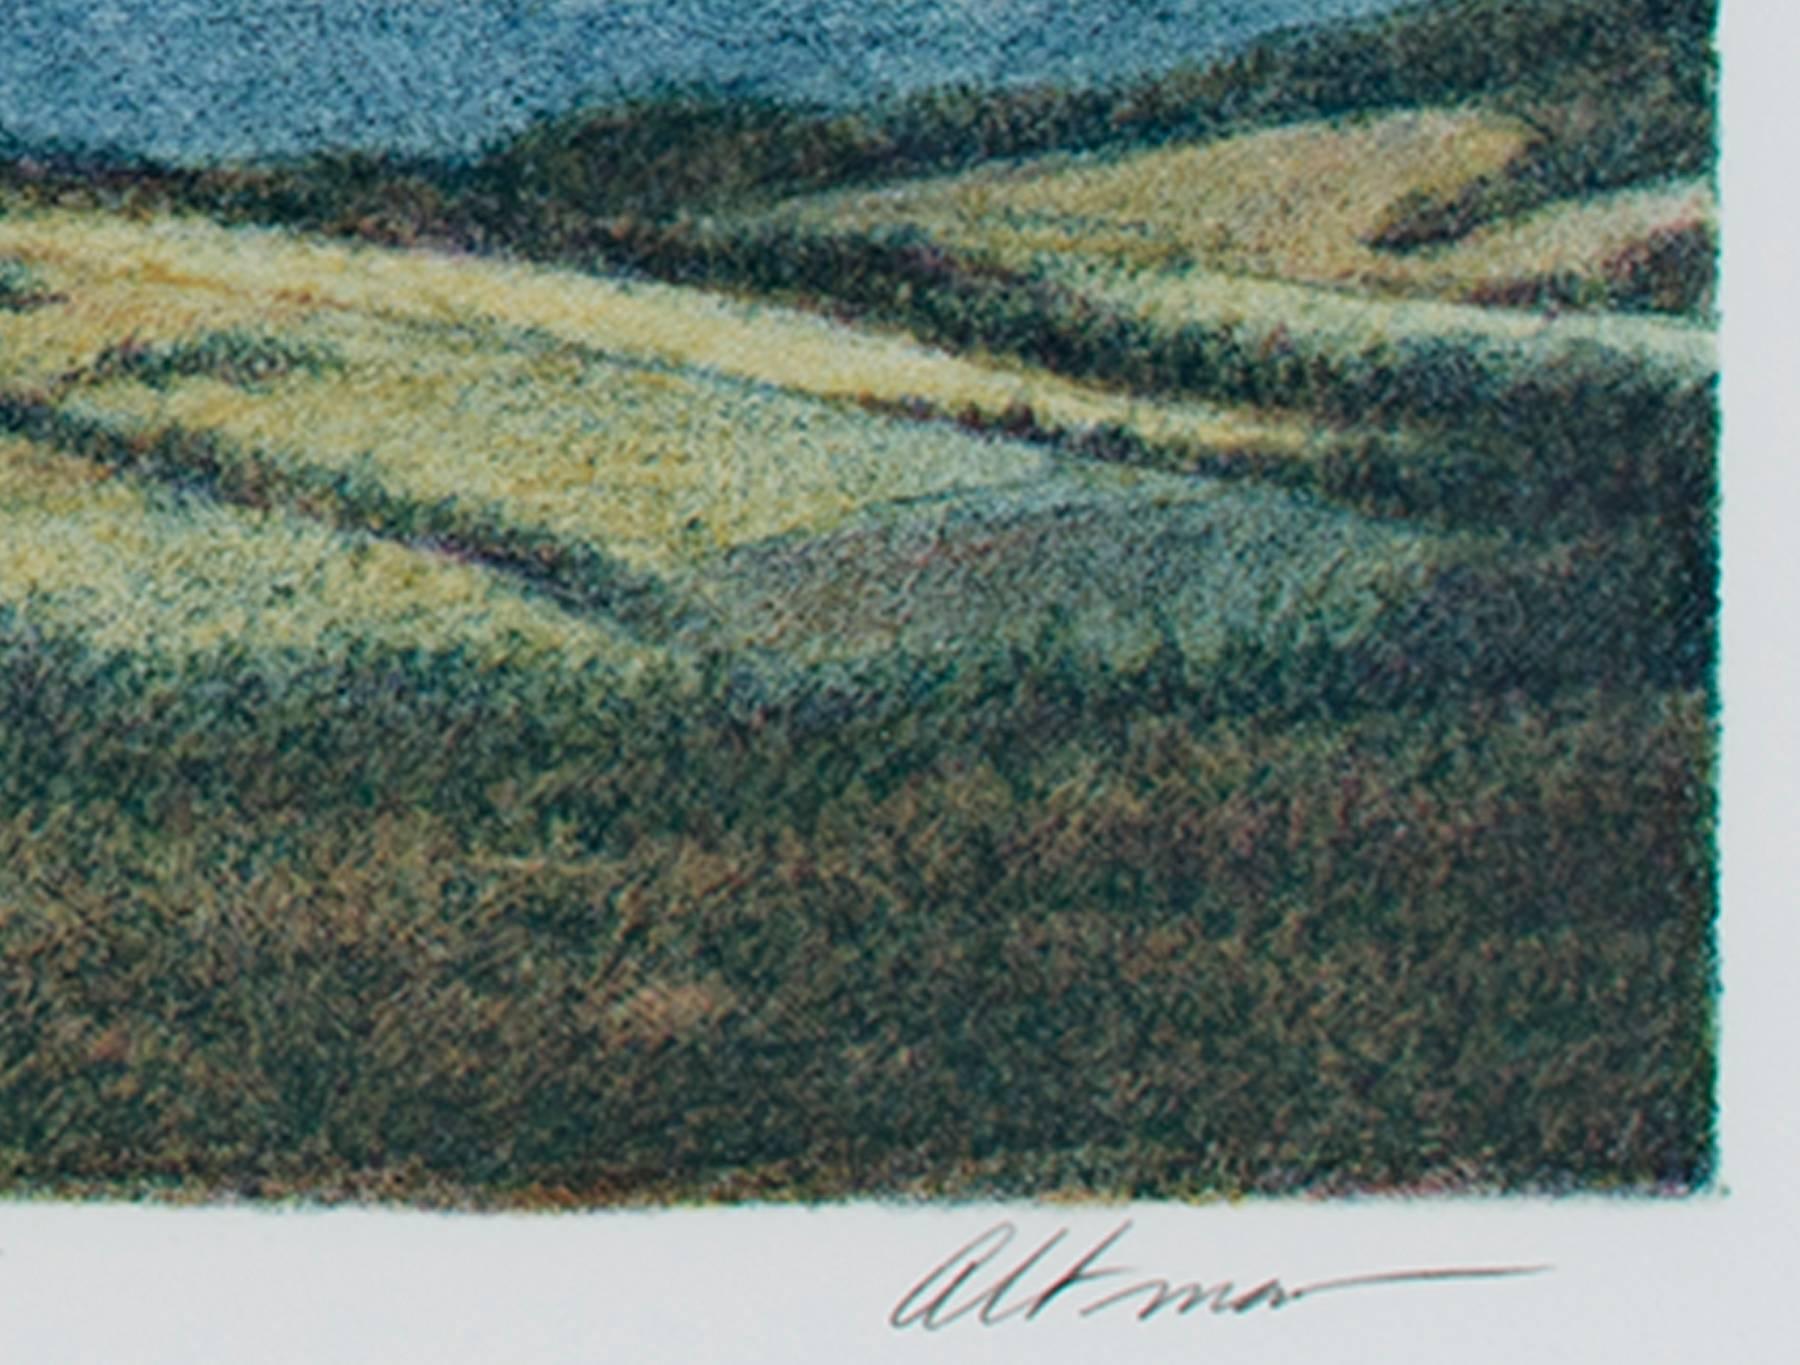  Contemporary color lithograph landscape field grass outdoor scene signed - Print by Harold Altman